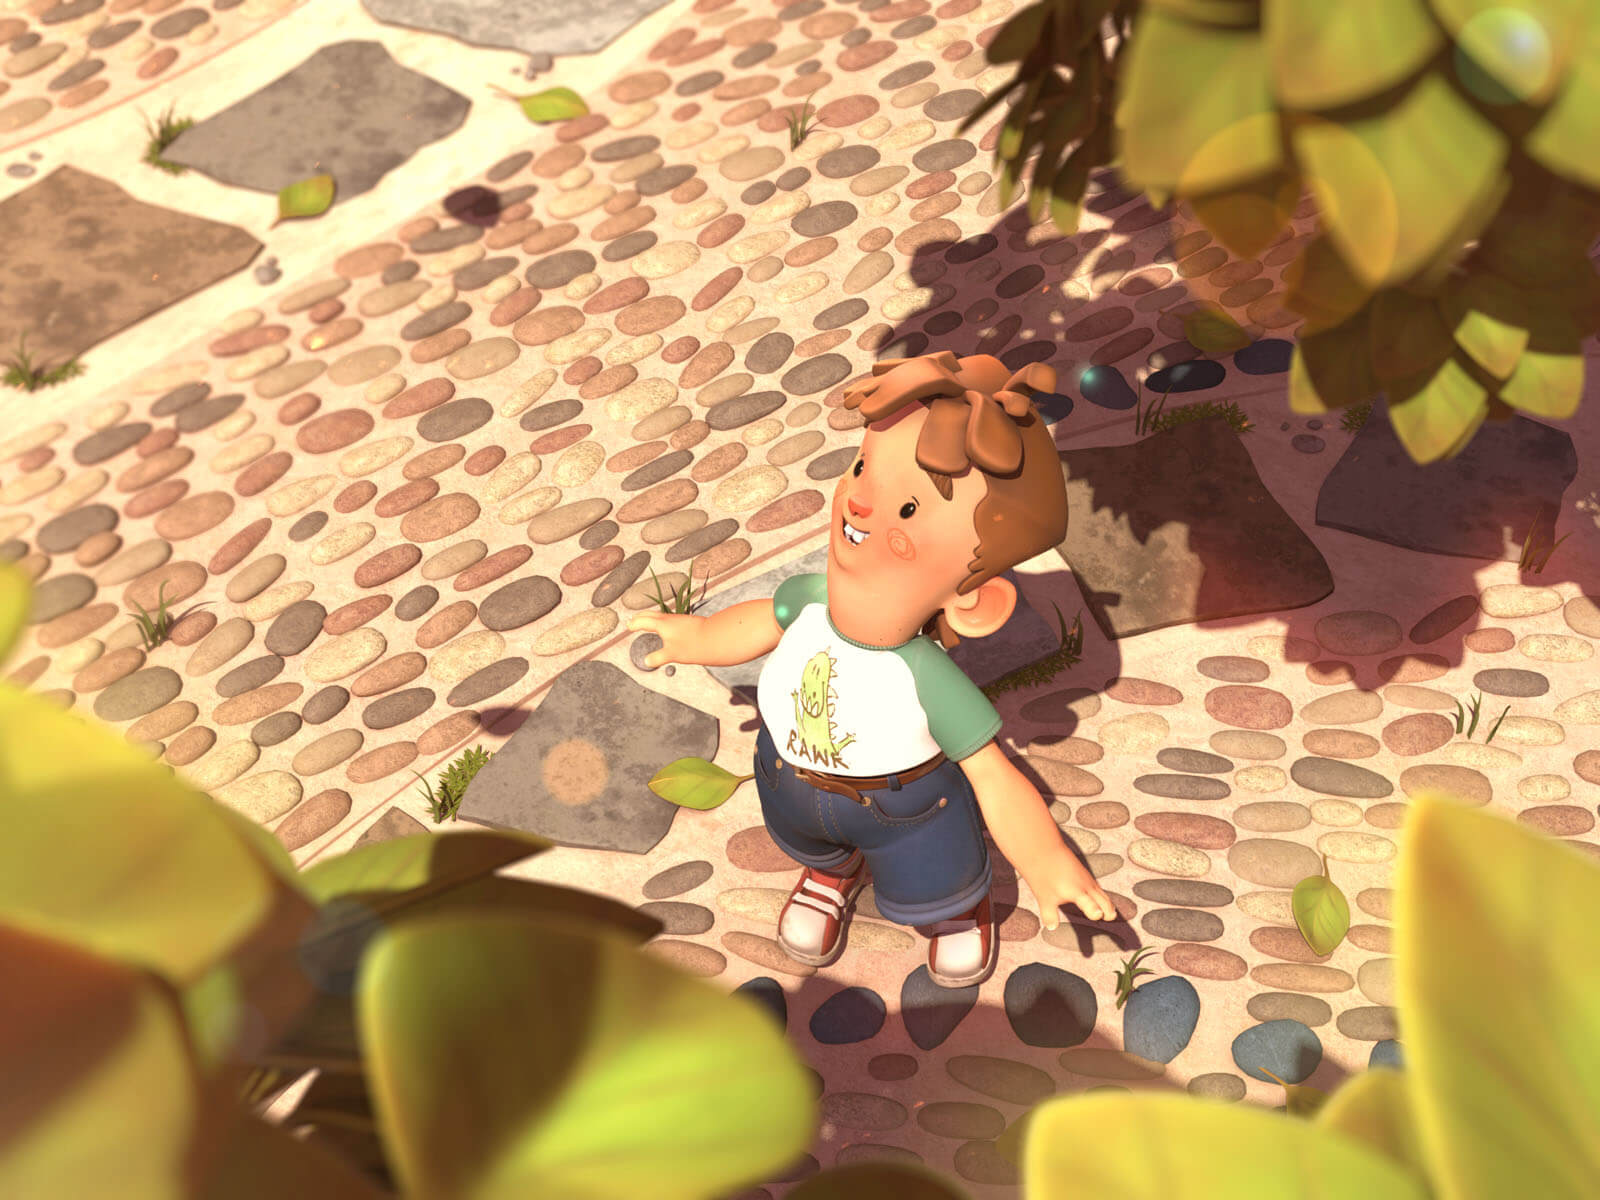 A boy stands on a cobblestone path and looks up beyond the leaves